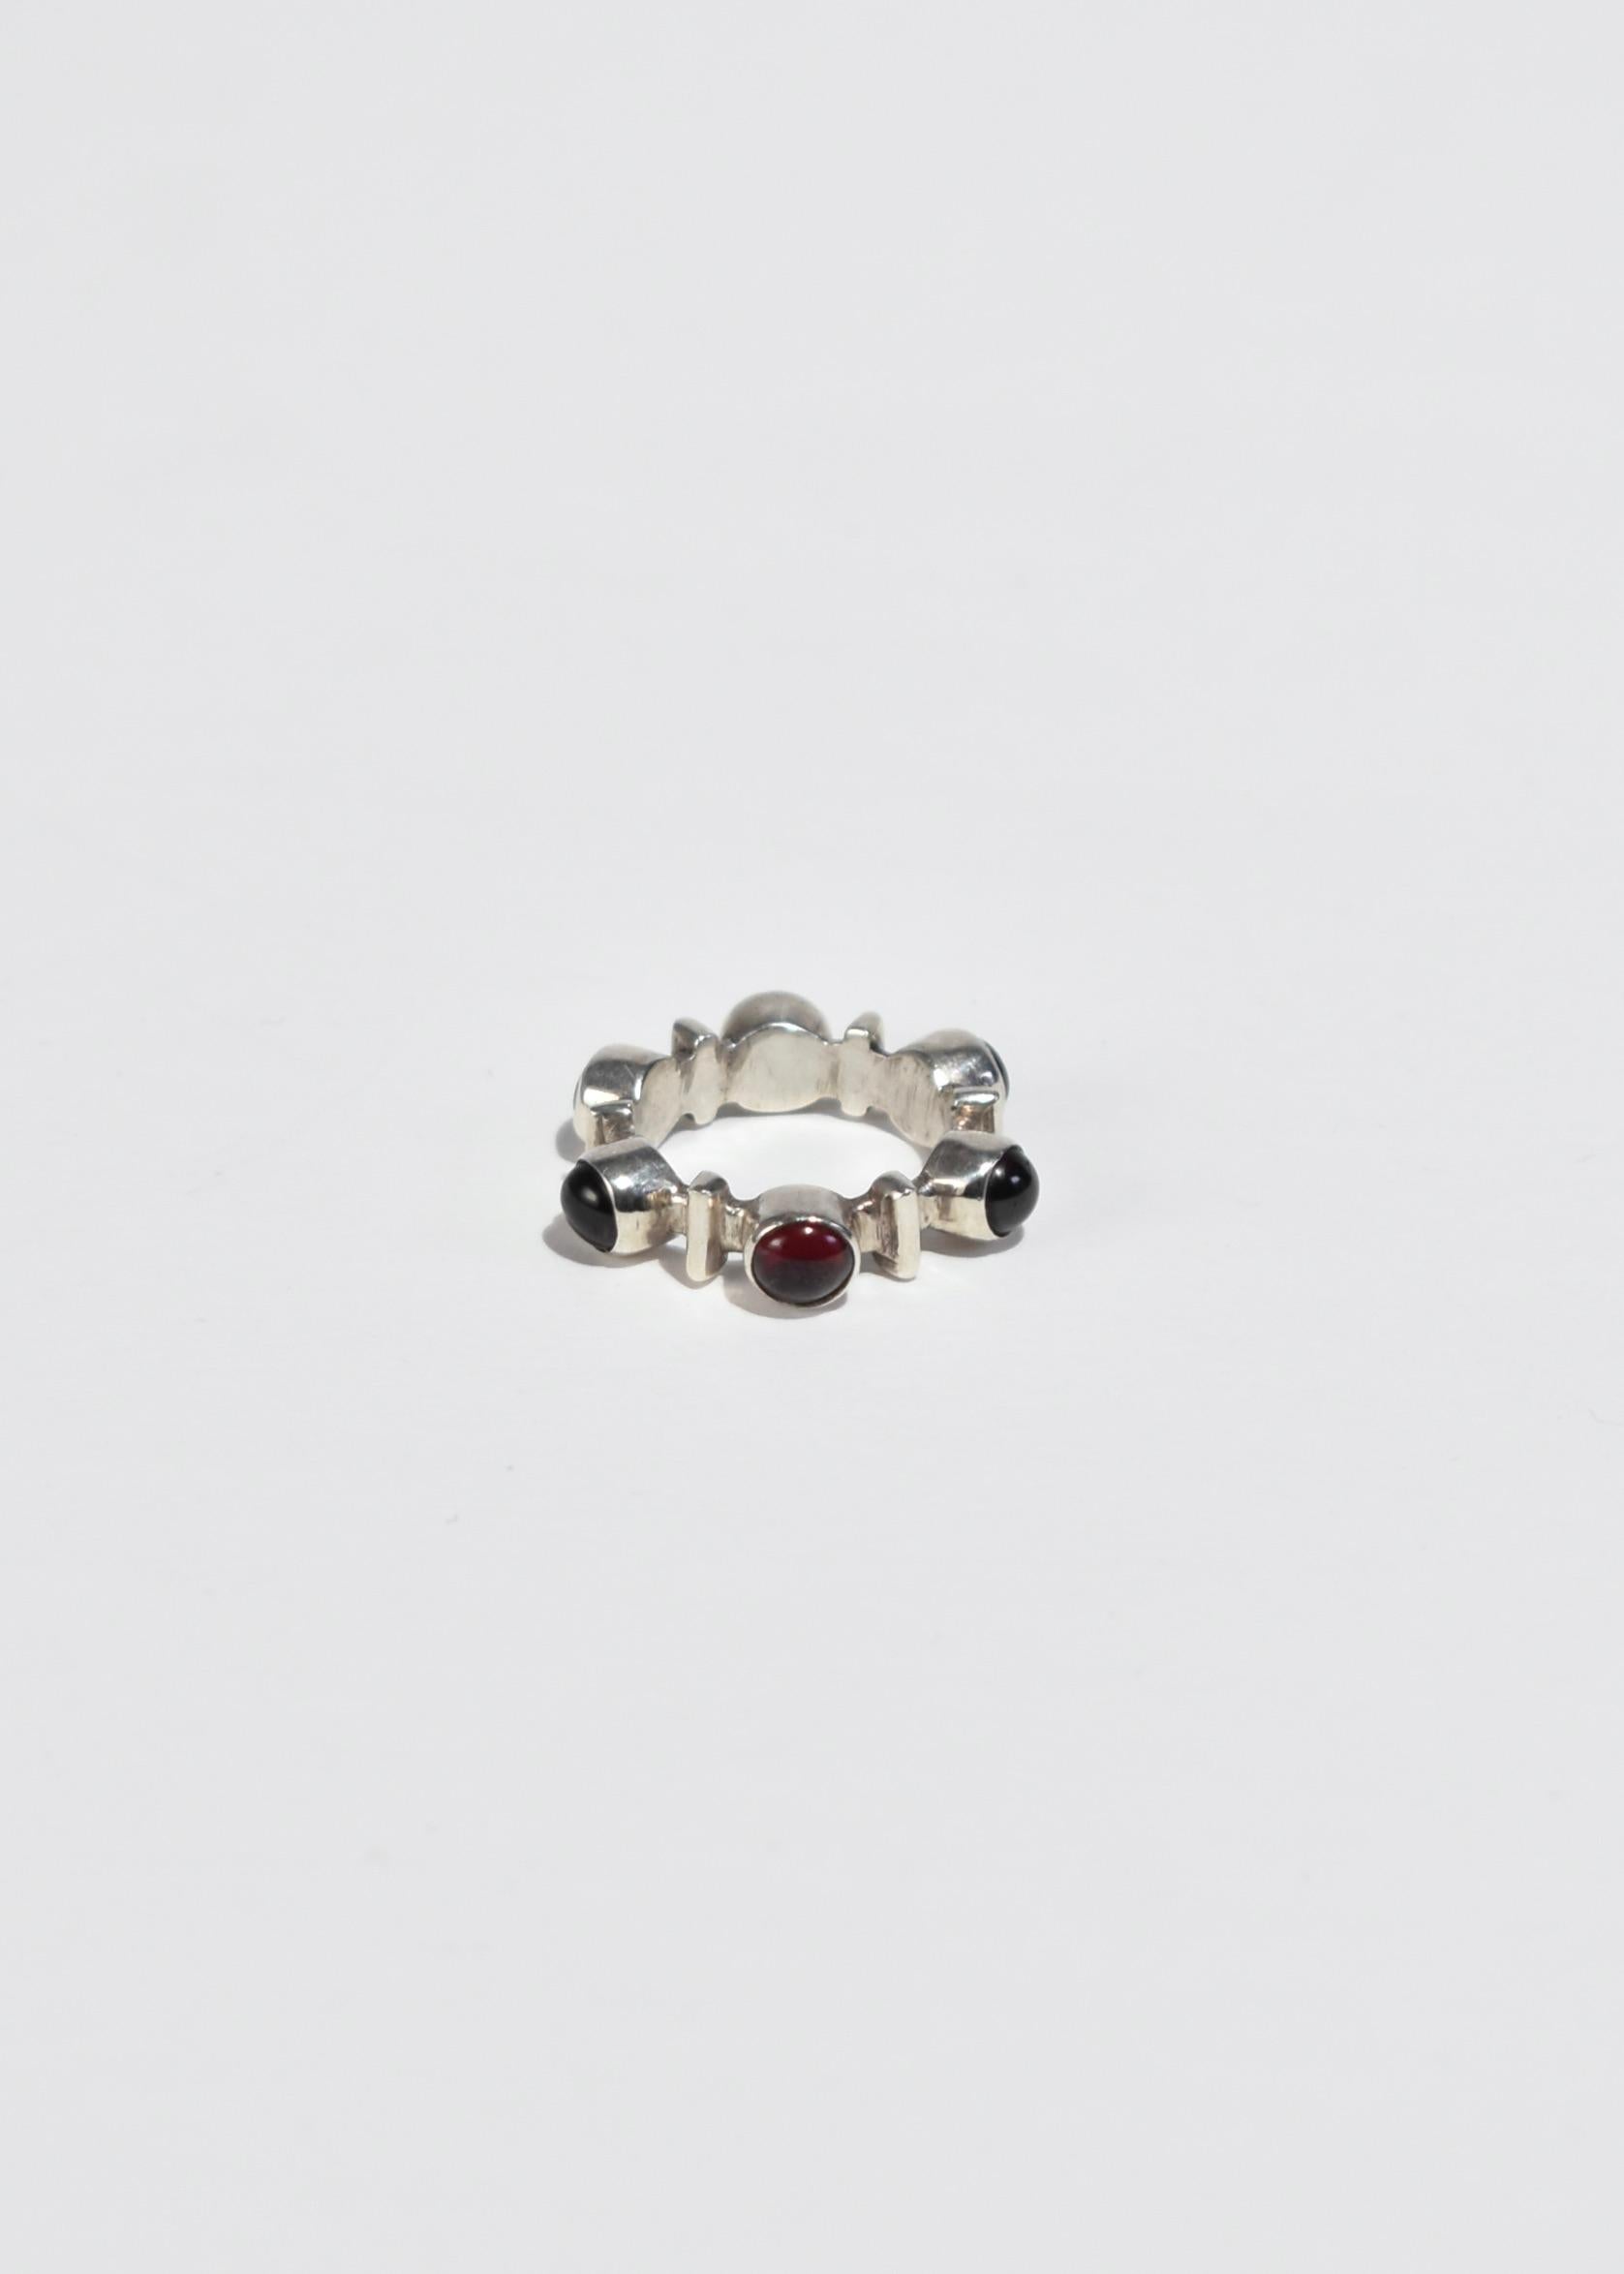 Stunning vintage modernist silver ring with round garnet stones.

Material: Sterling silver, garnet.

We recommend storing in a dry place and periodic polishing with a cloth.